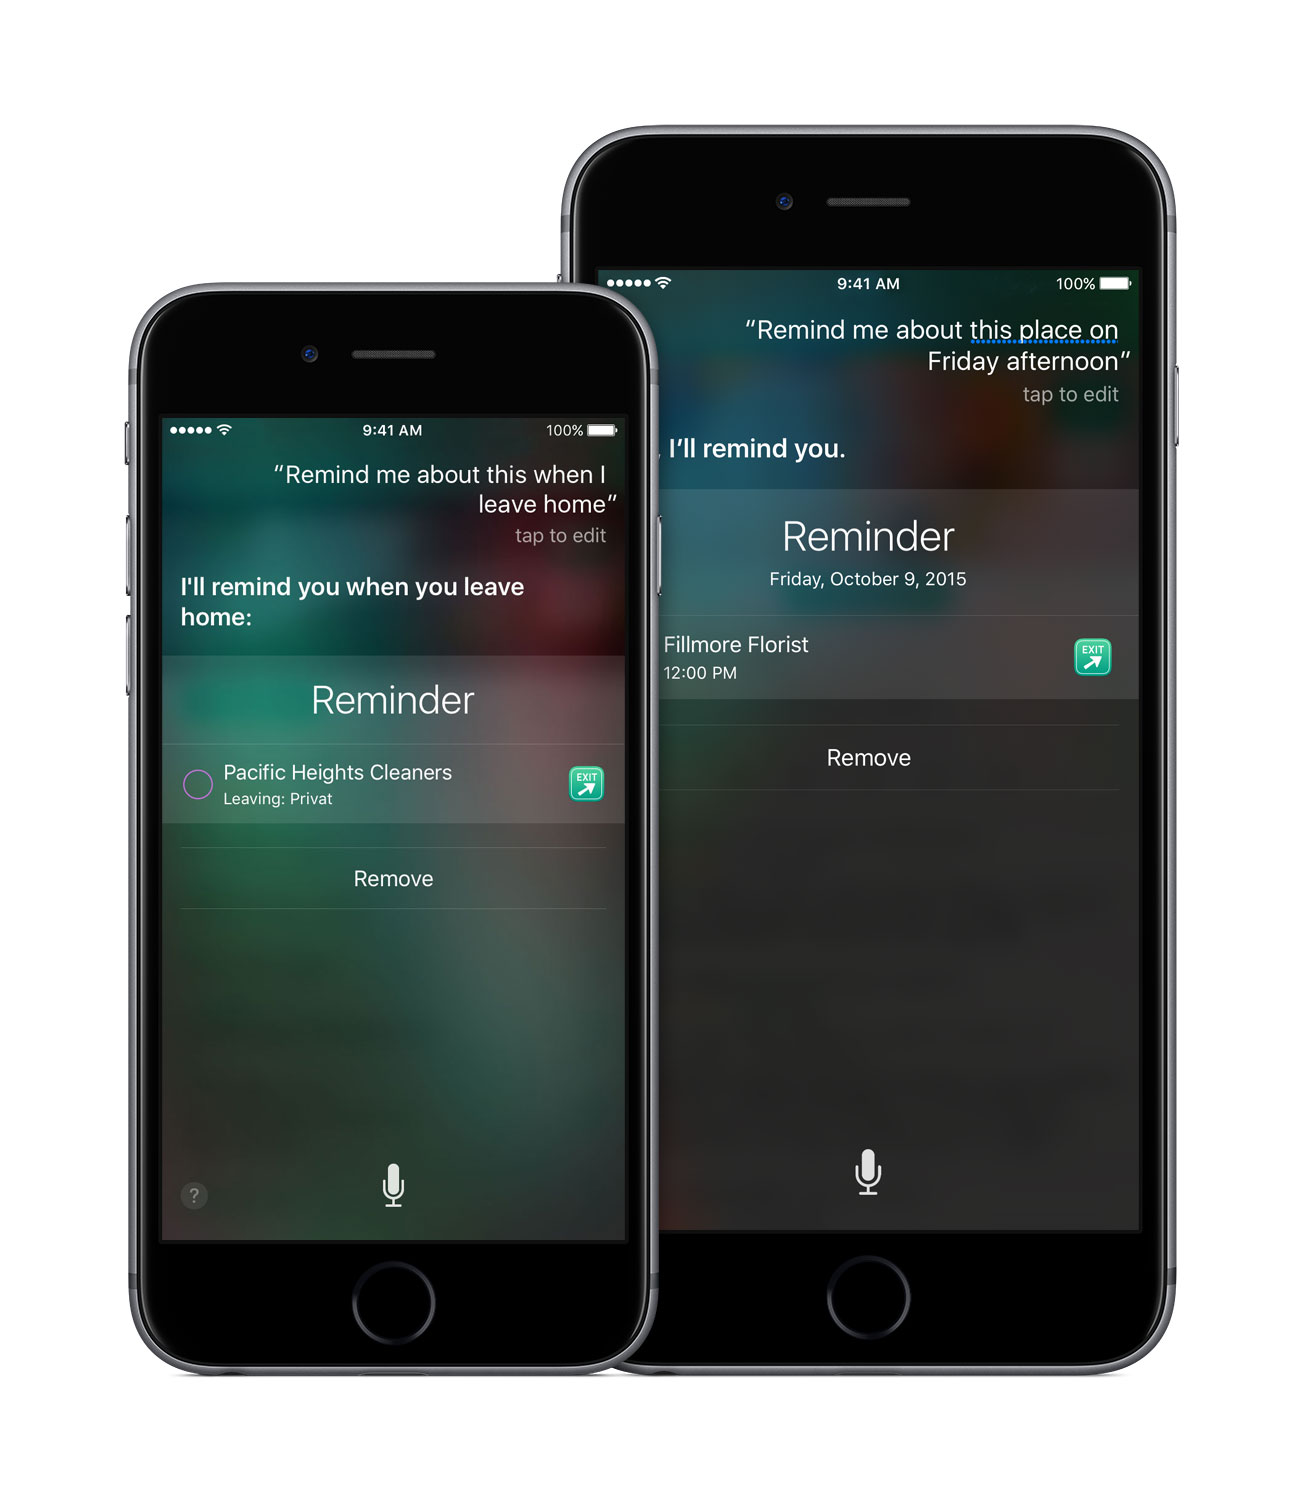 Where To? Version 9.0 - Includes New iOS 9 and iPhone 6s Features